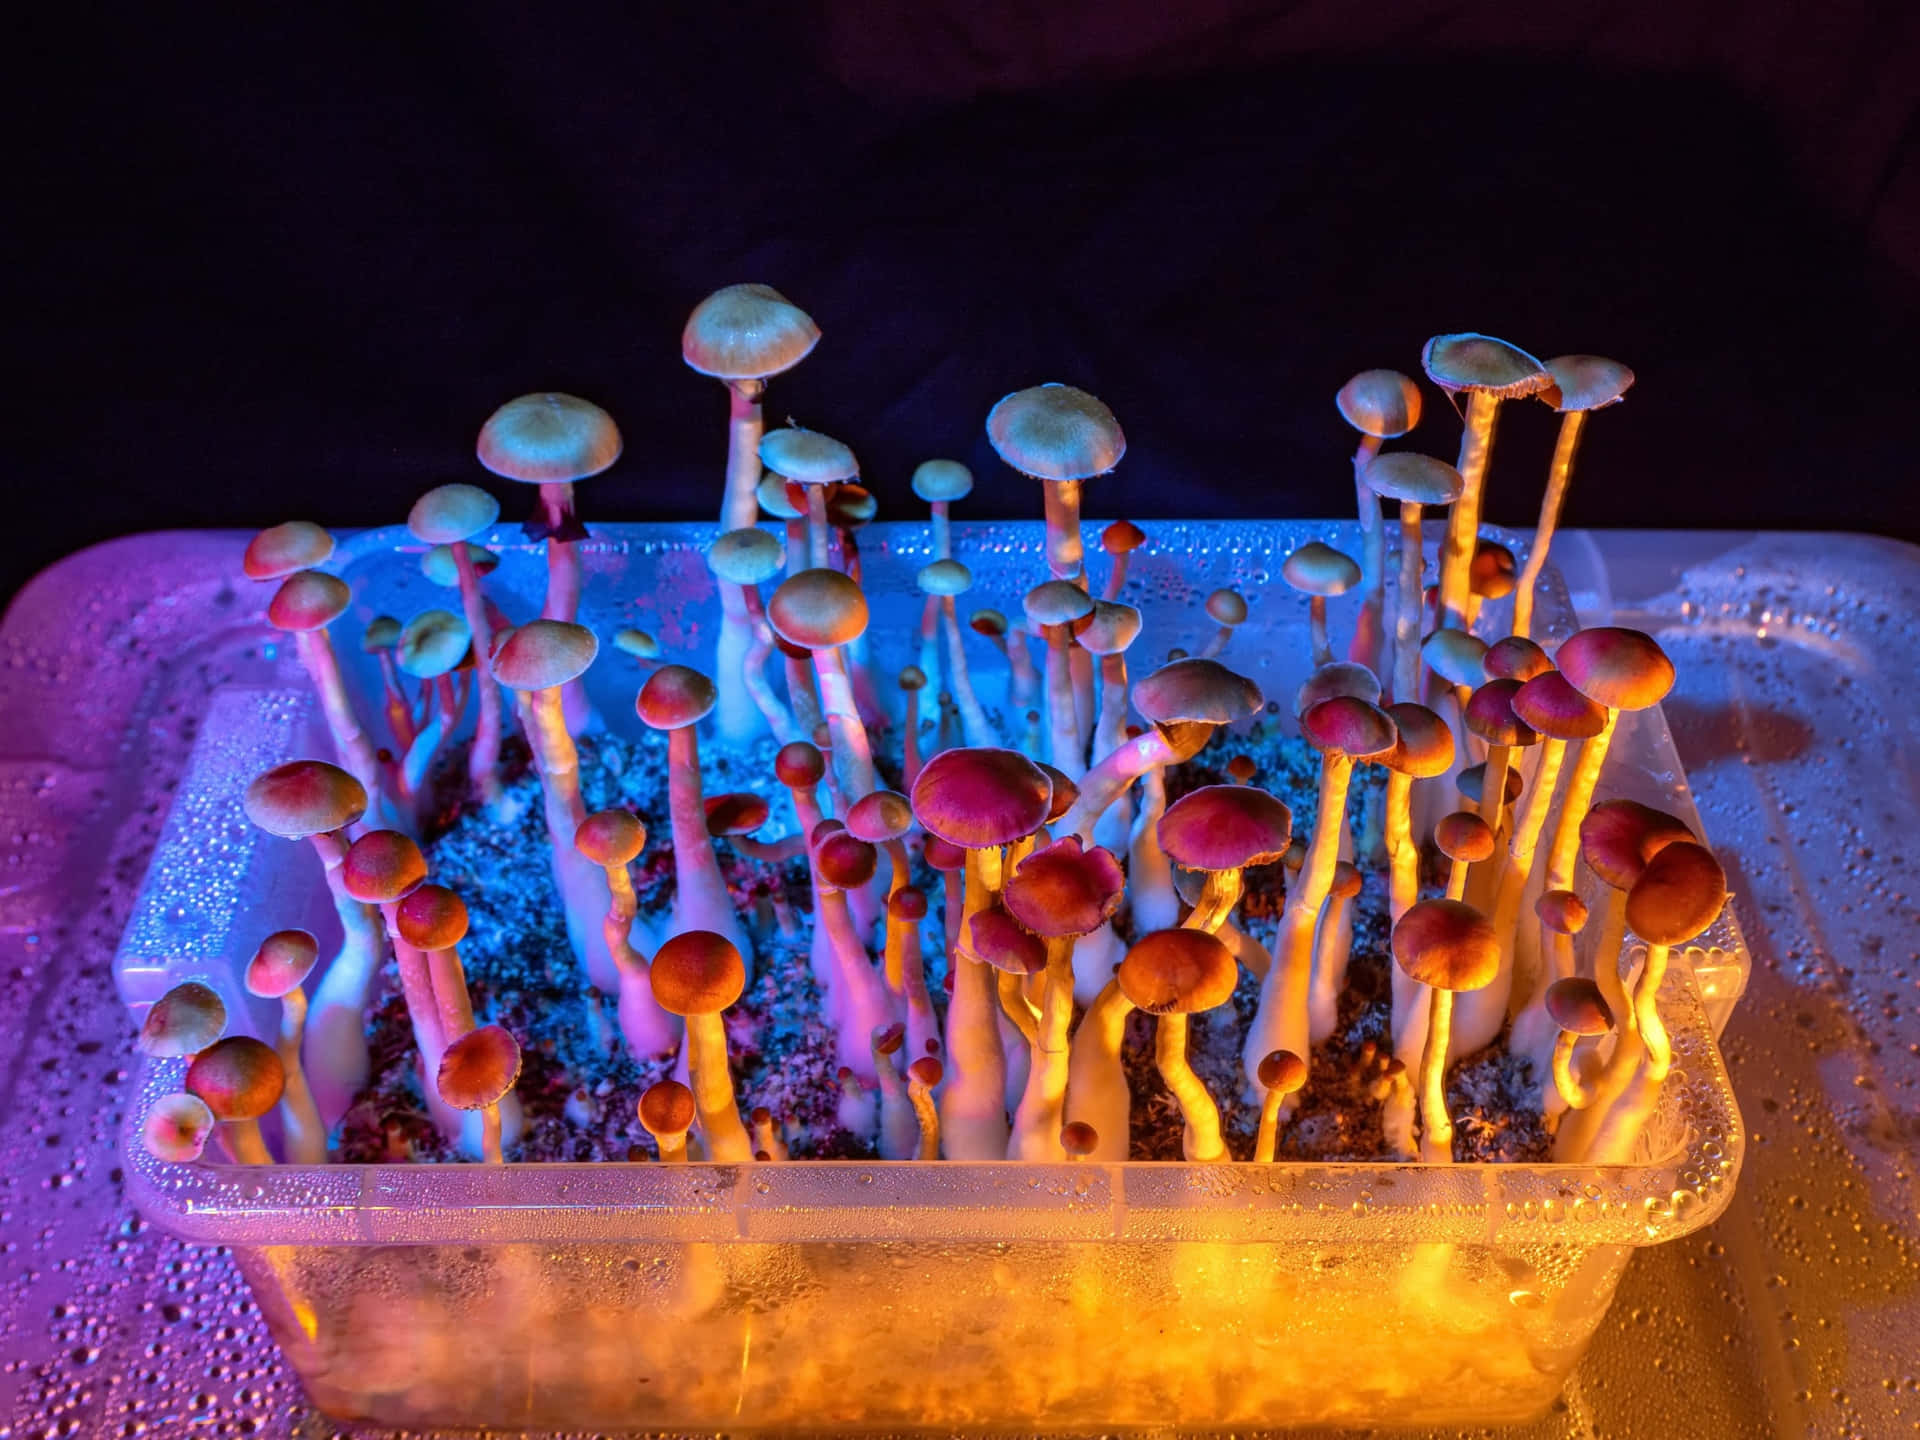 A magical psychedelic mushroom in a mysterious forest.